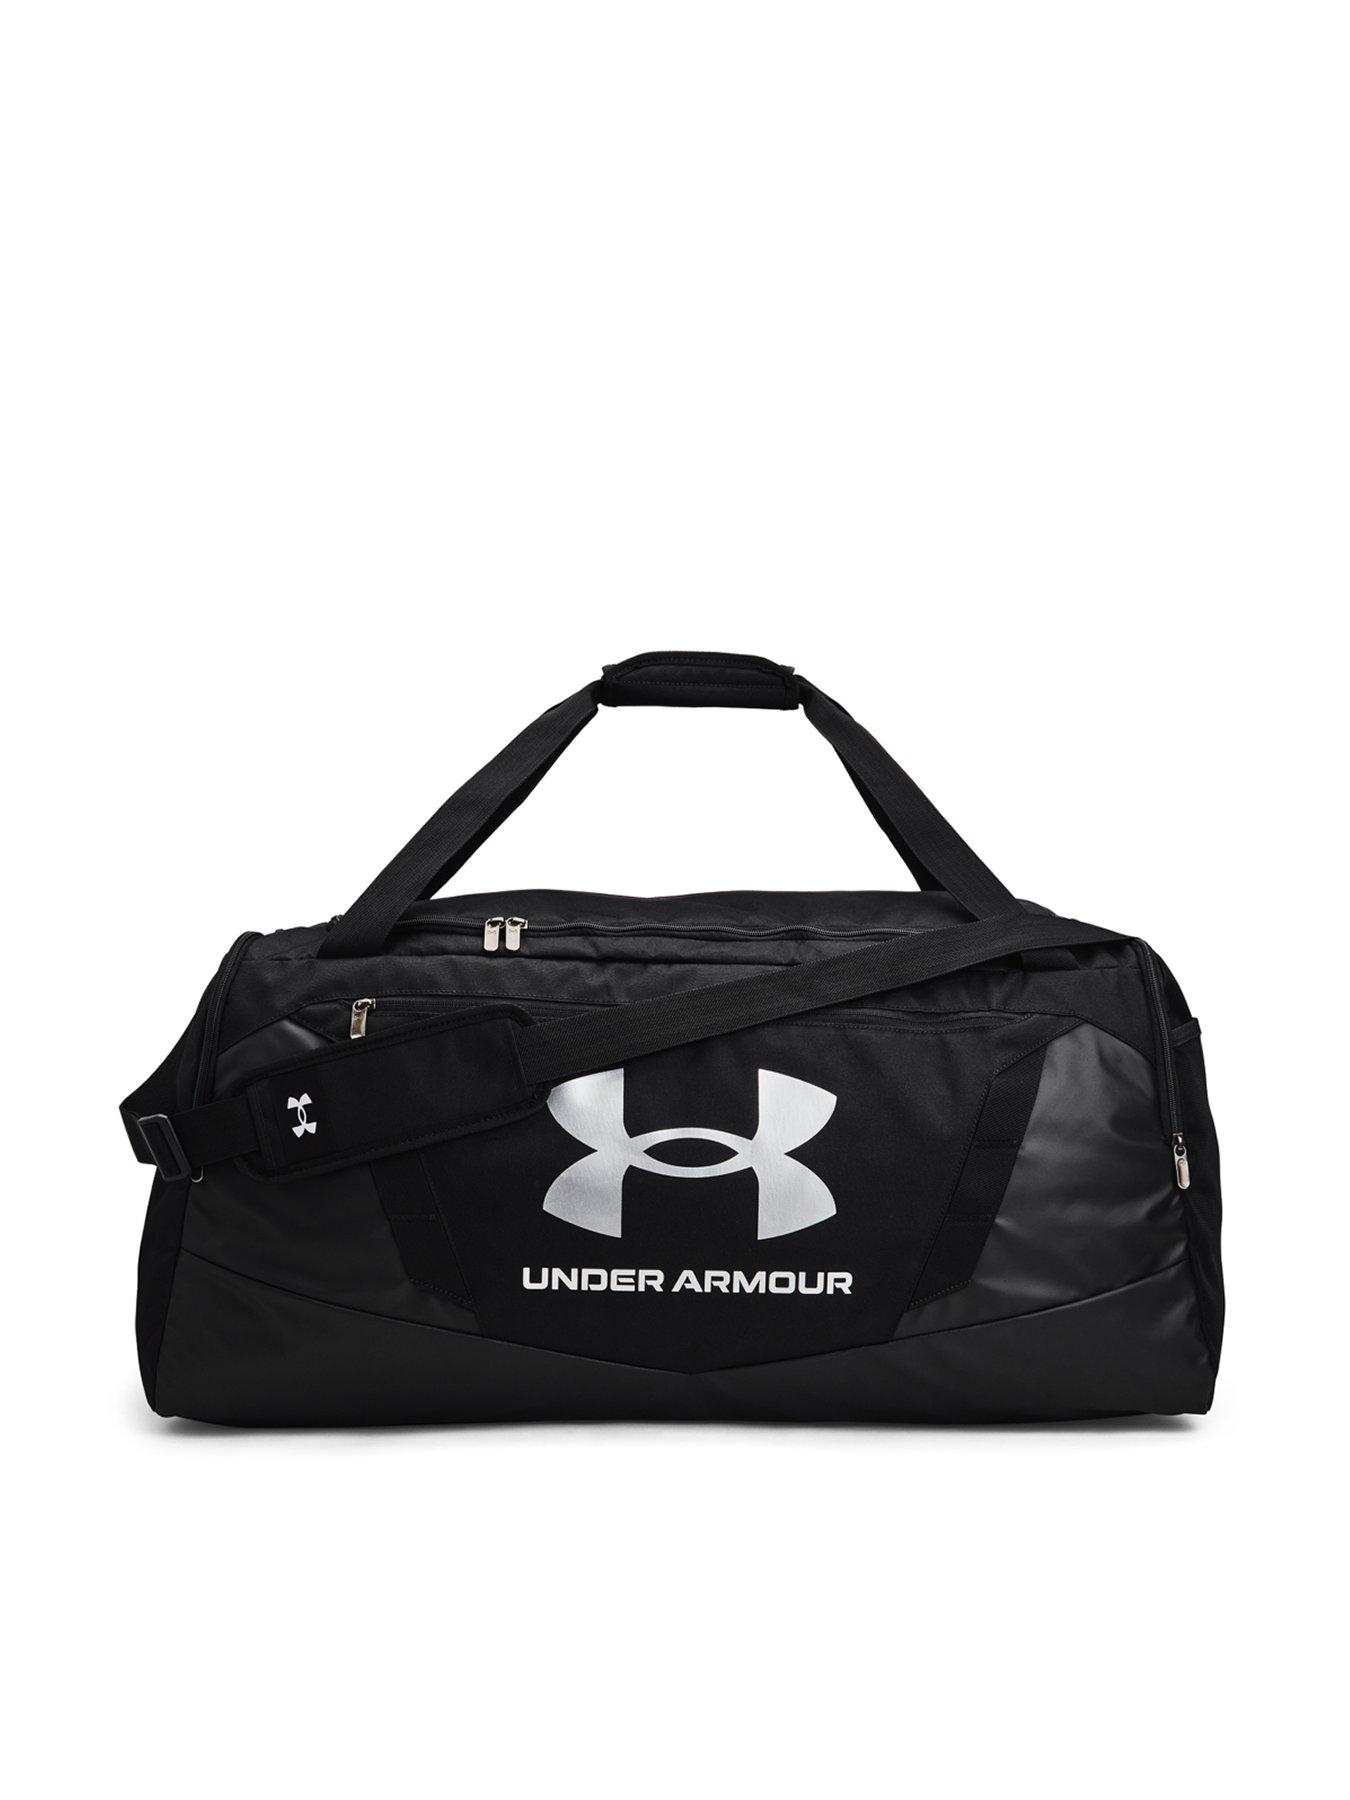 Accessories Training Undeniable 5.0 Large Duffle Bag - Black